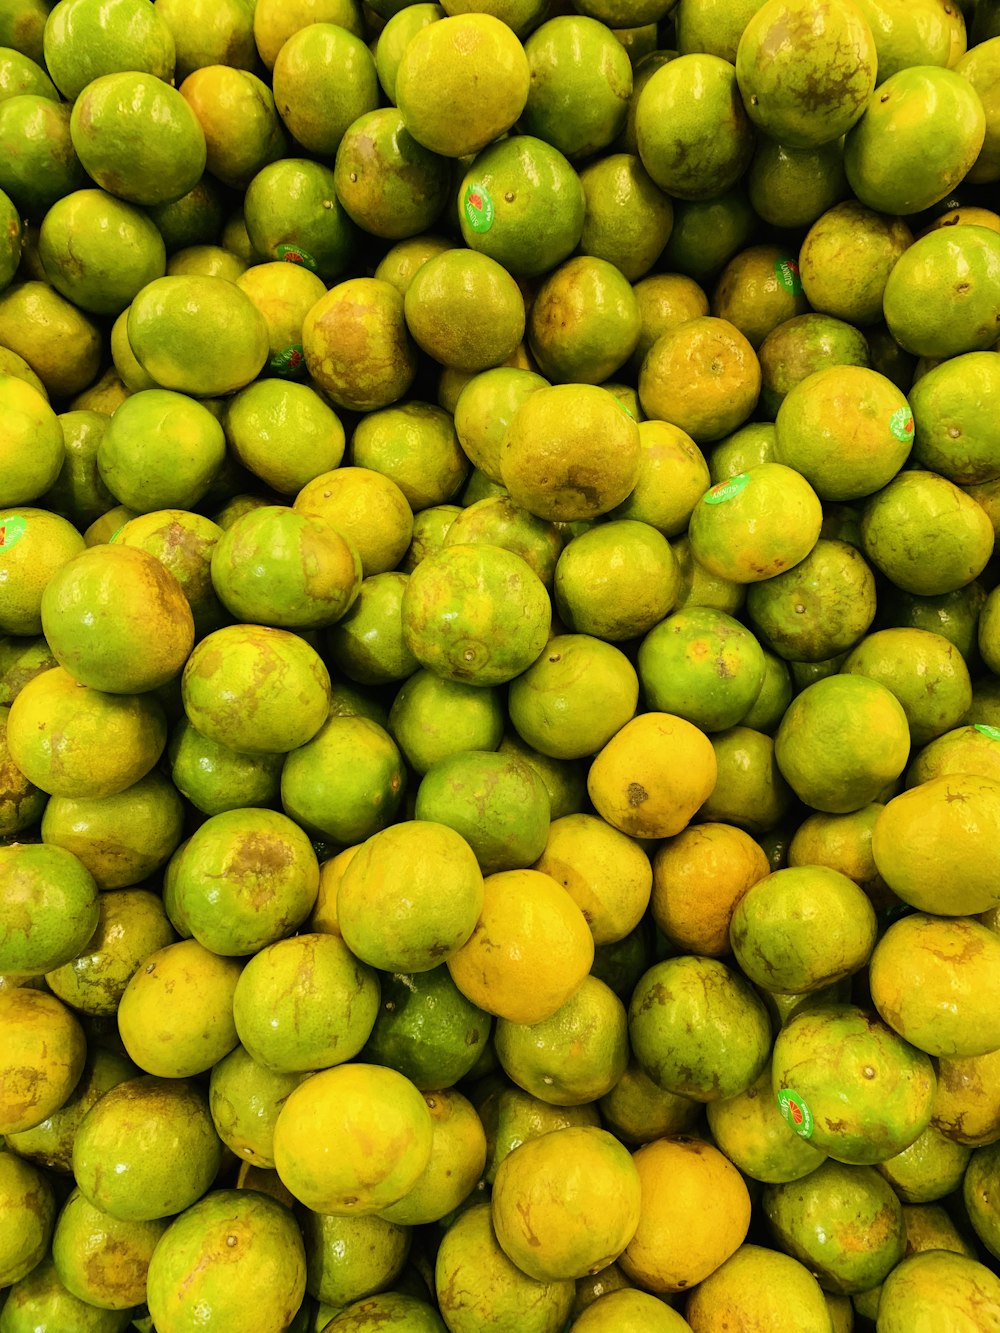 yellow and green oval fruits